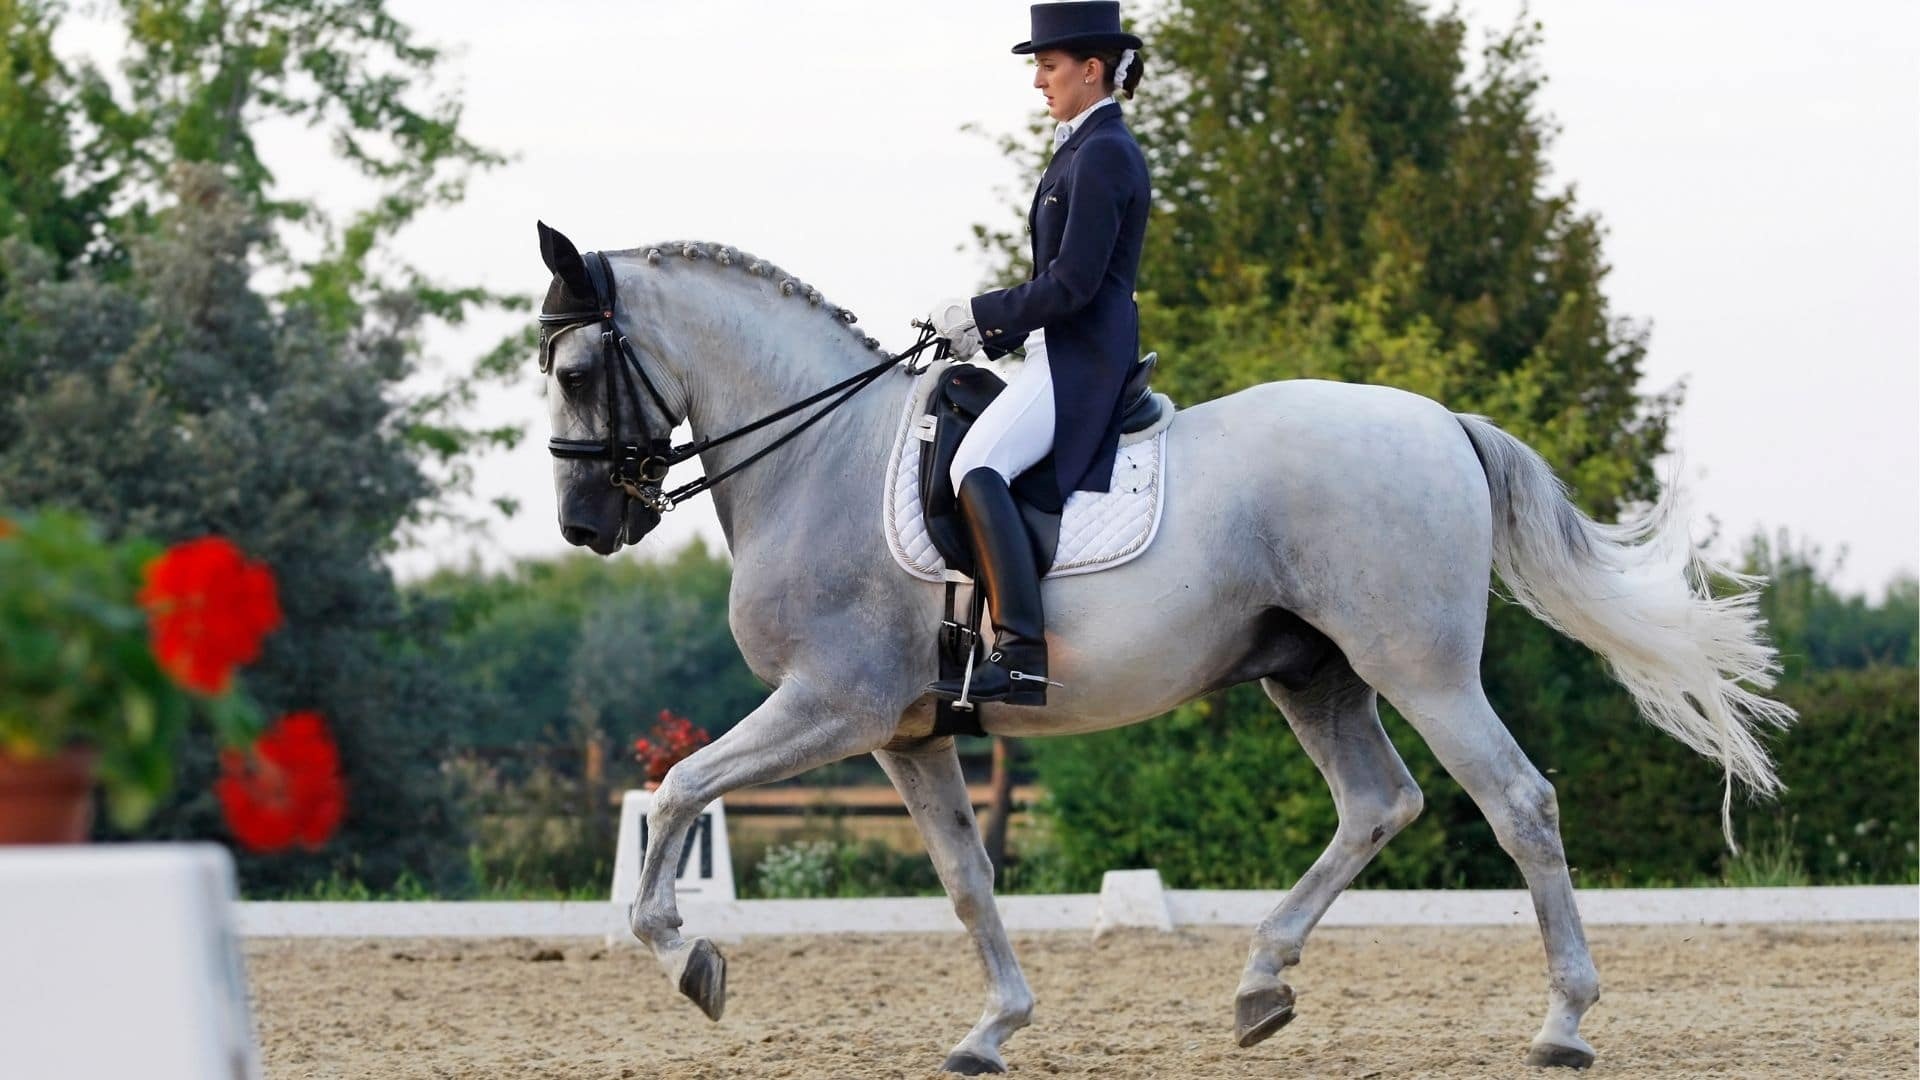 Dressage: An Andalusian horse walking, Horse training, Upper level. 1920x1080 Full HD Background.